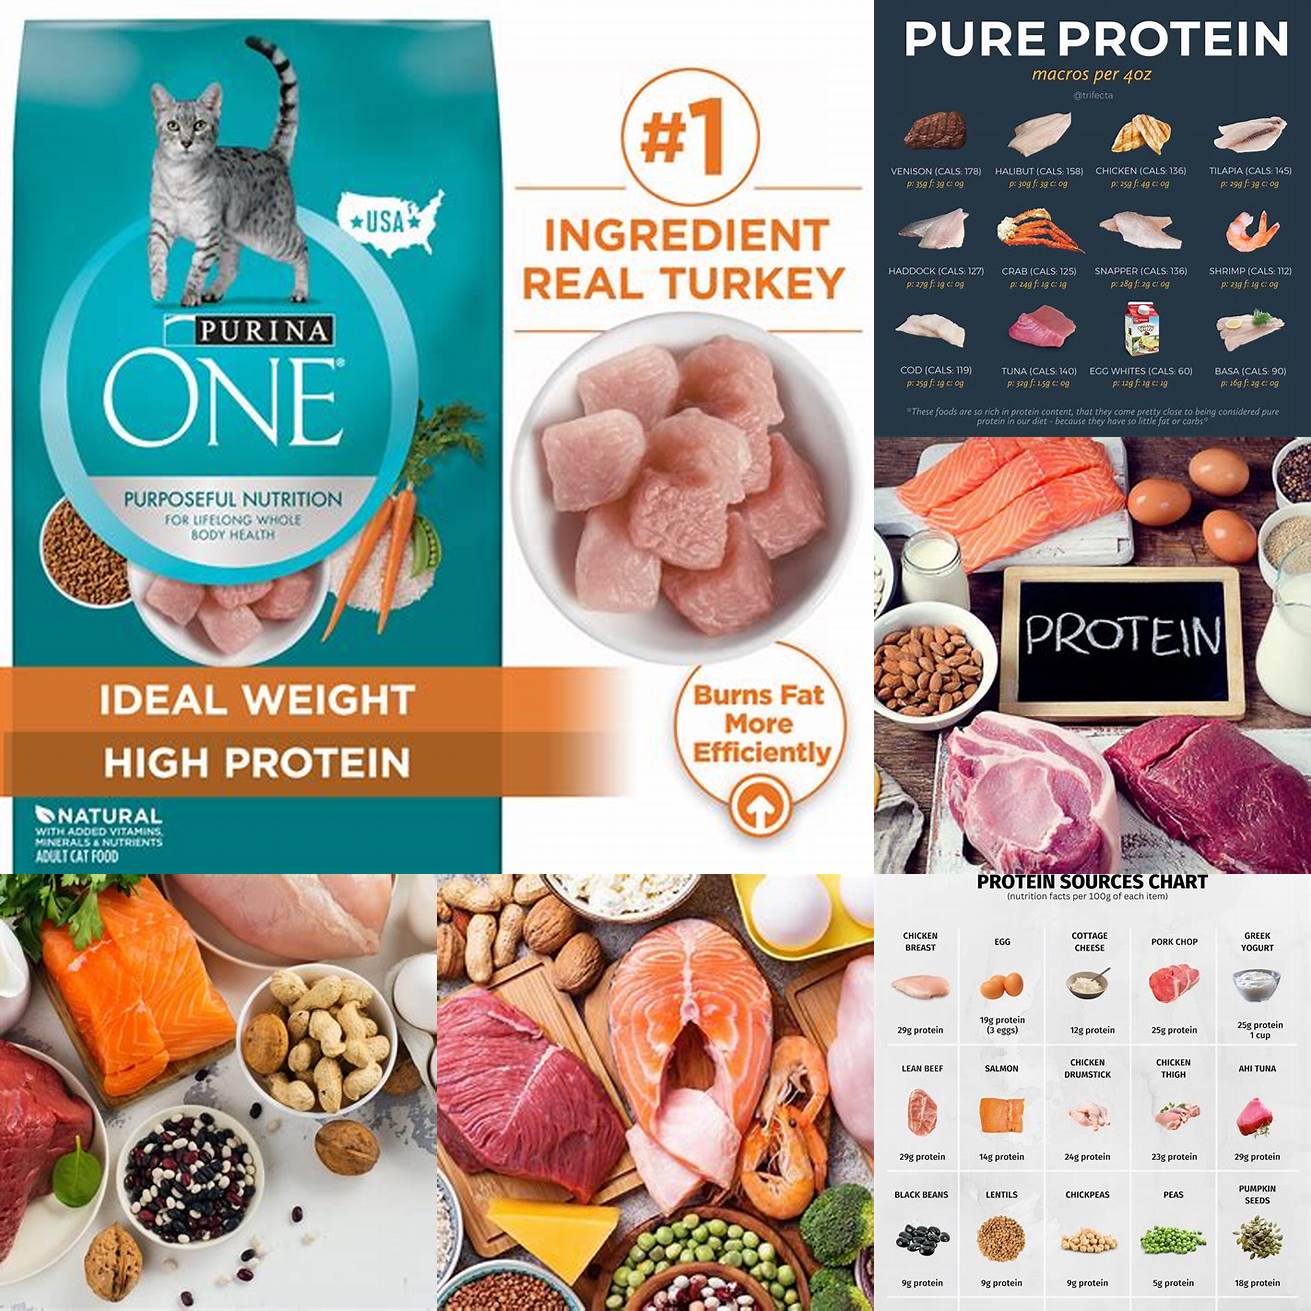 Look for foods with high-quality protein sources